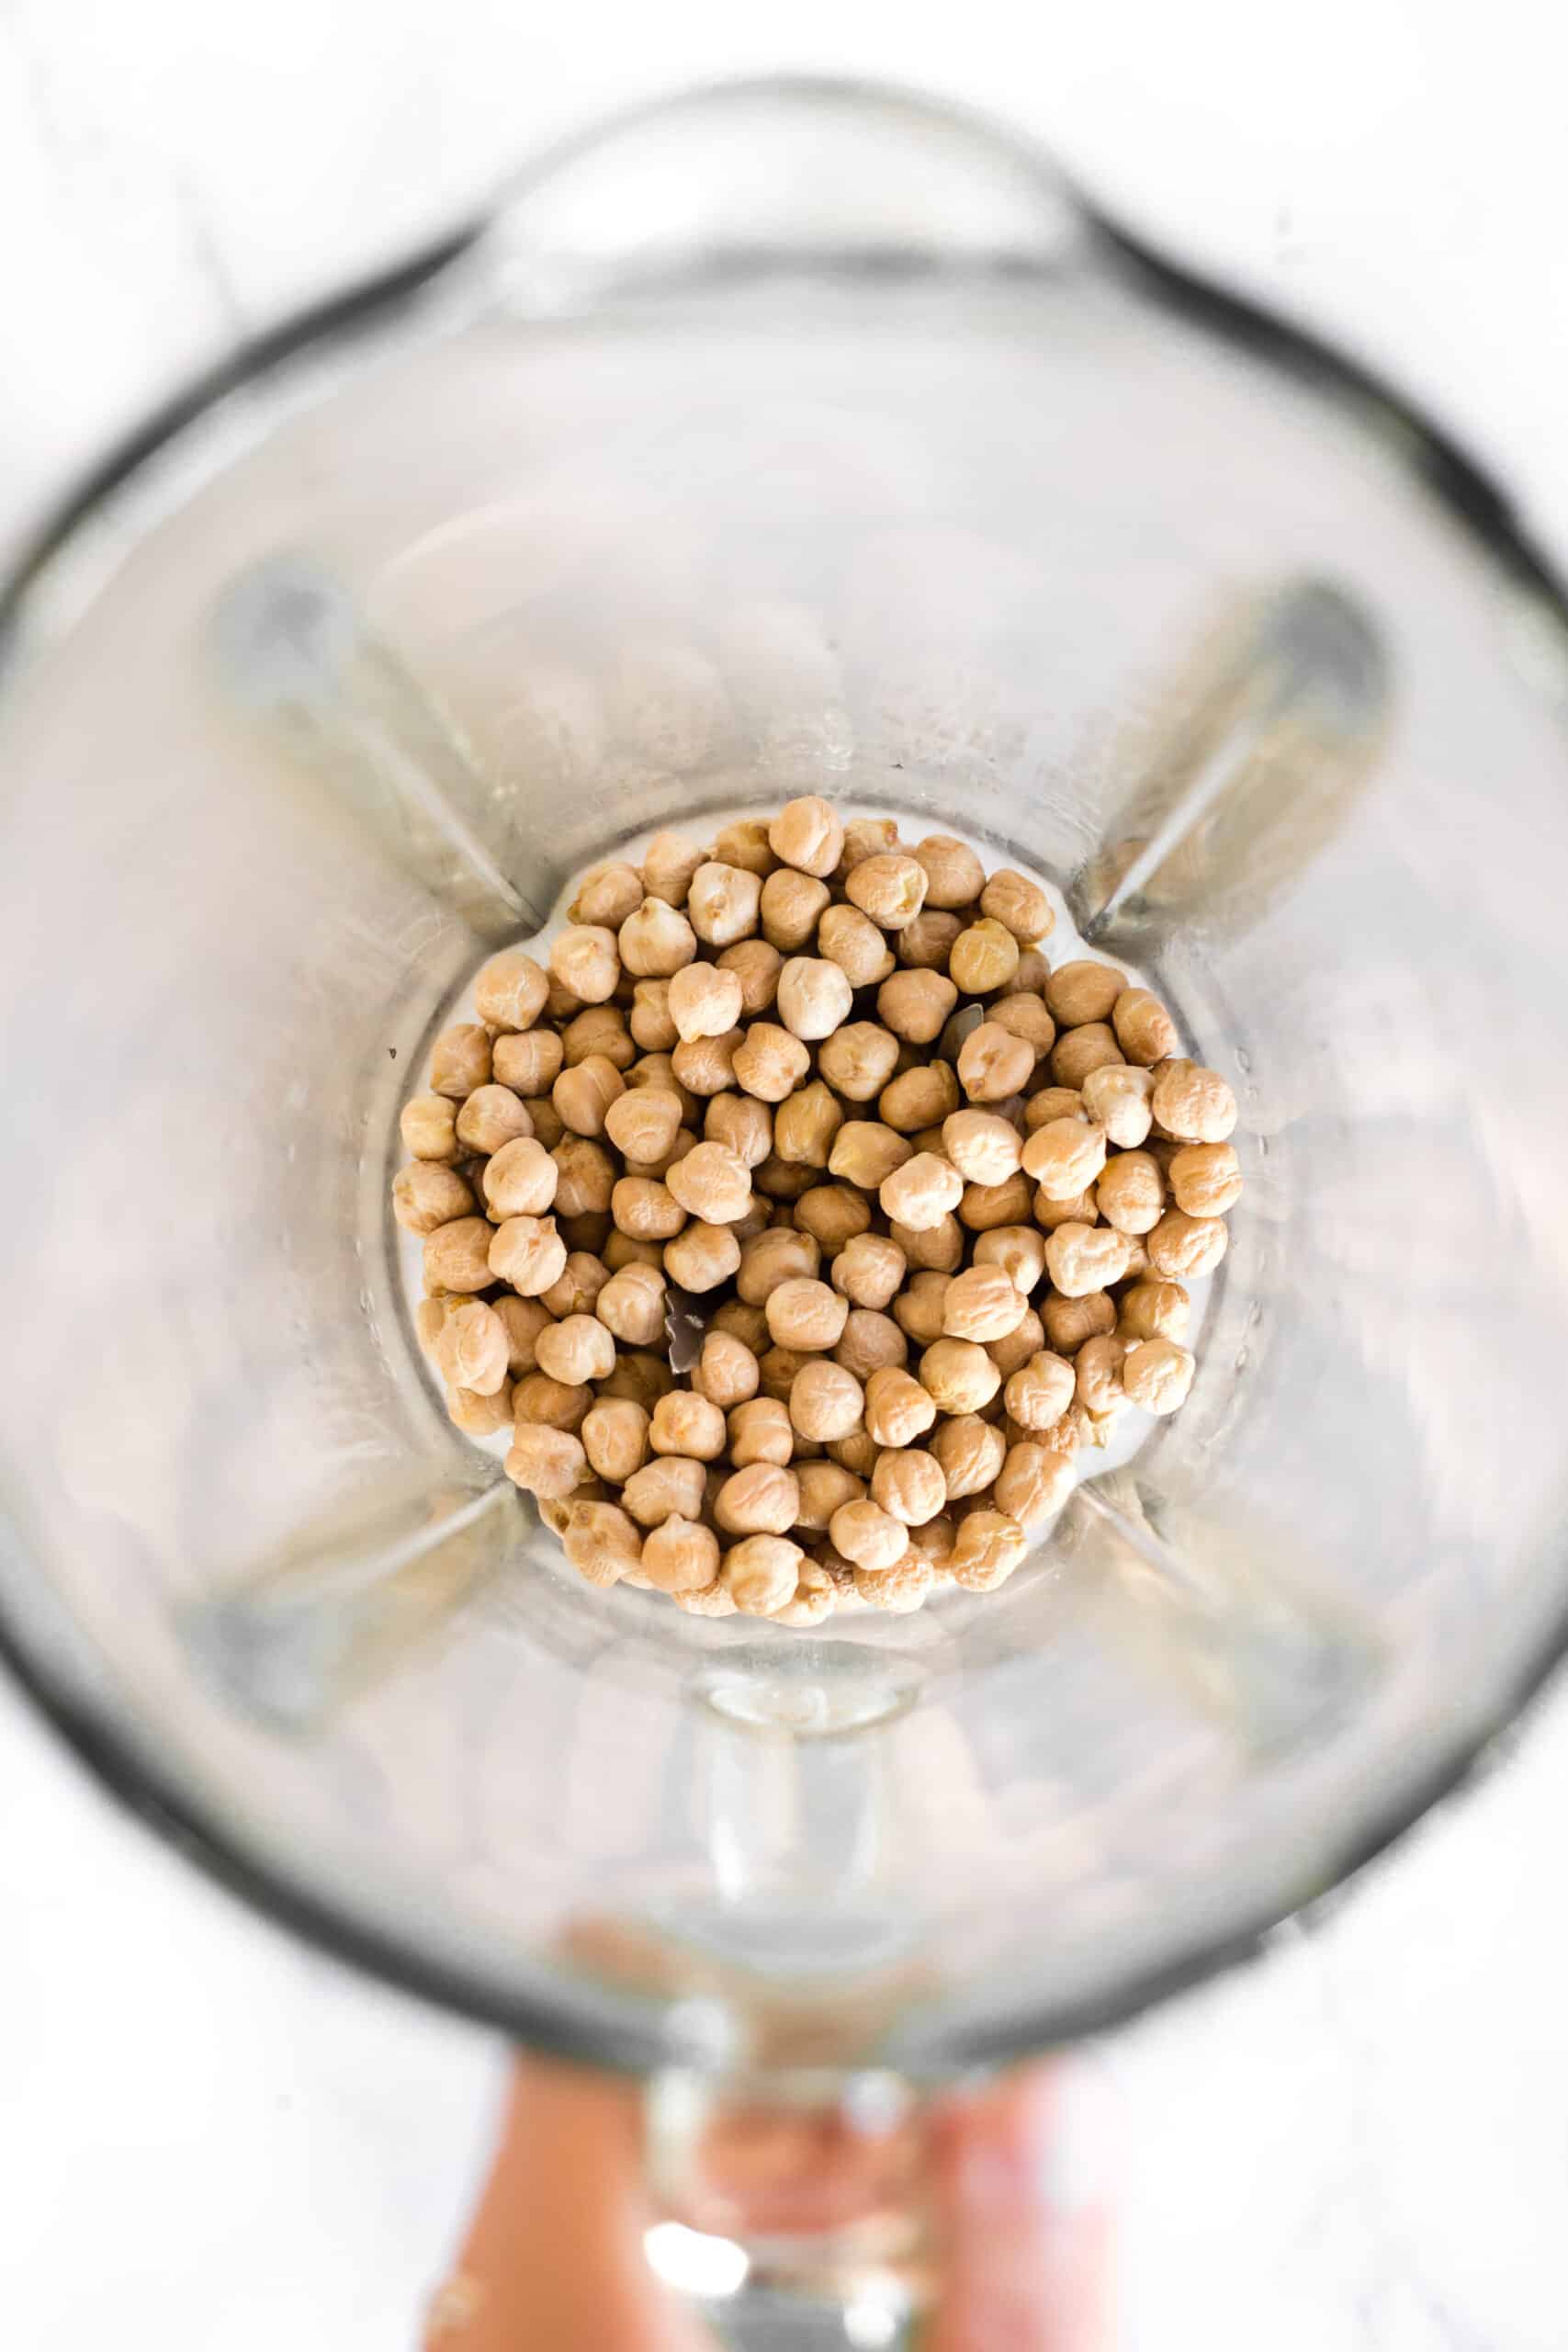 Dried chickpeas in the bowl of a high-speed blender.